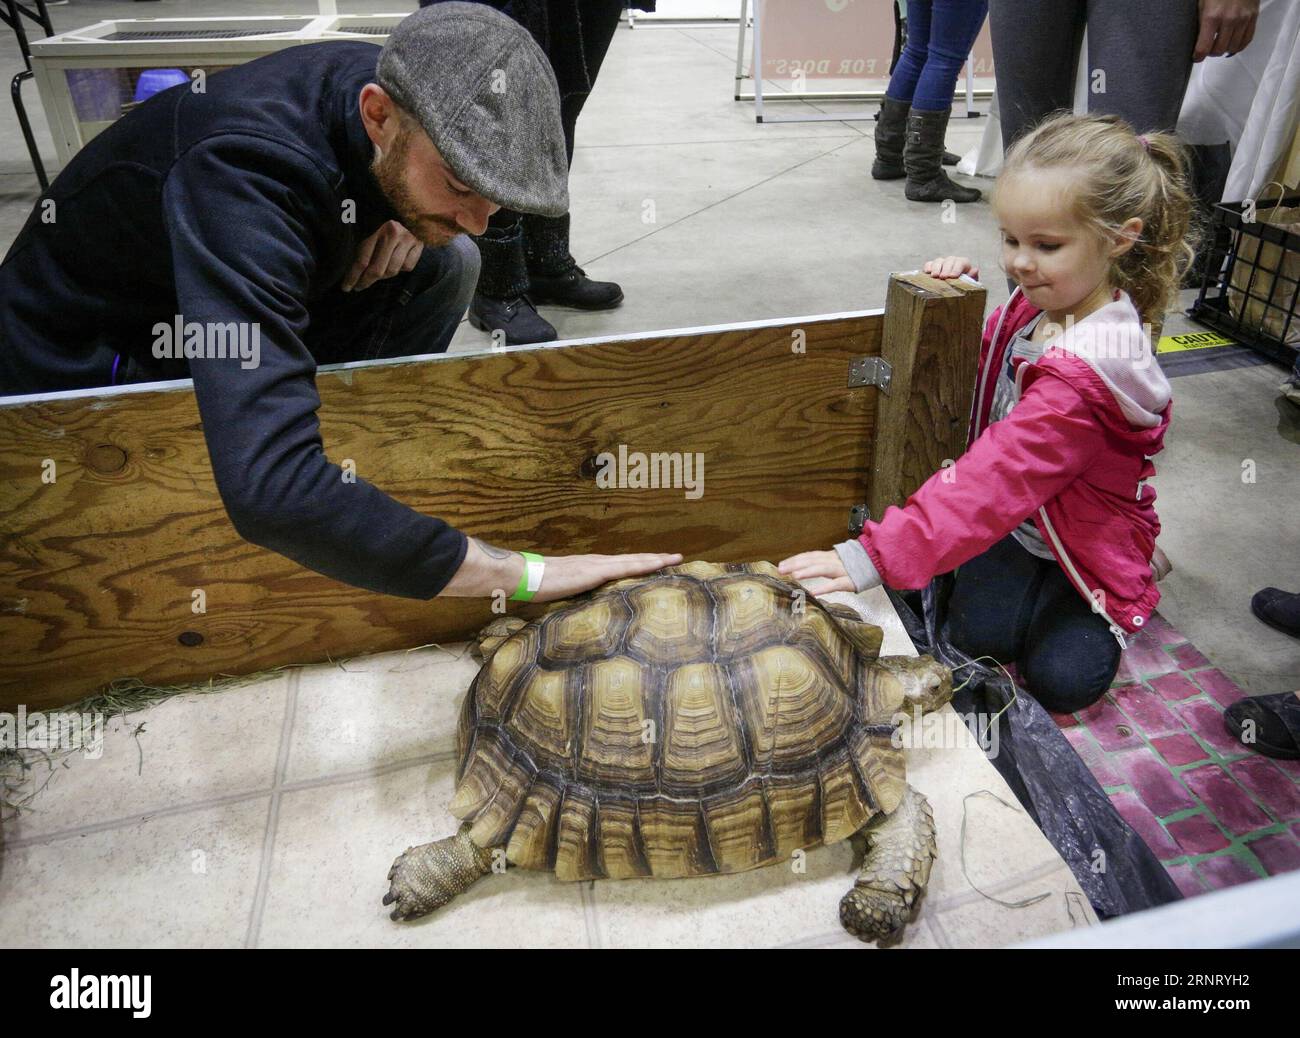 (171022) -- SURREY, Oct. 22, 2017 -- People touch a tortoise during the Pacific Pet Expo in Surrey, British Columbia, Canada, Oct. 21, 2017. The Pacific Pet Expo was a two-day event providing opportunities for pet owners and animal enthusiasts to meet with different kinds of animals and share their experiences in caring pets. ) (lx) CANADA-SURREY-PET EXPO LiangxSen PUBLICATIONxNOTxINxCHN Stock Photo